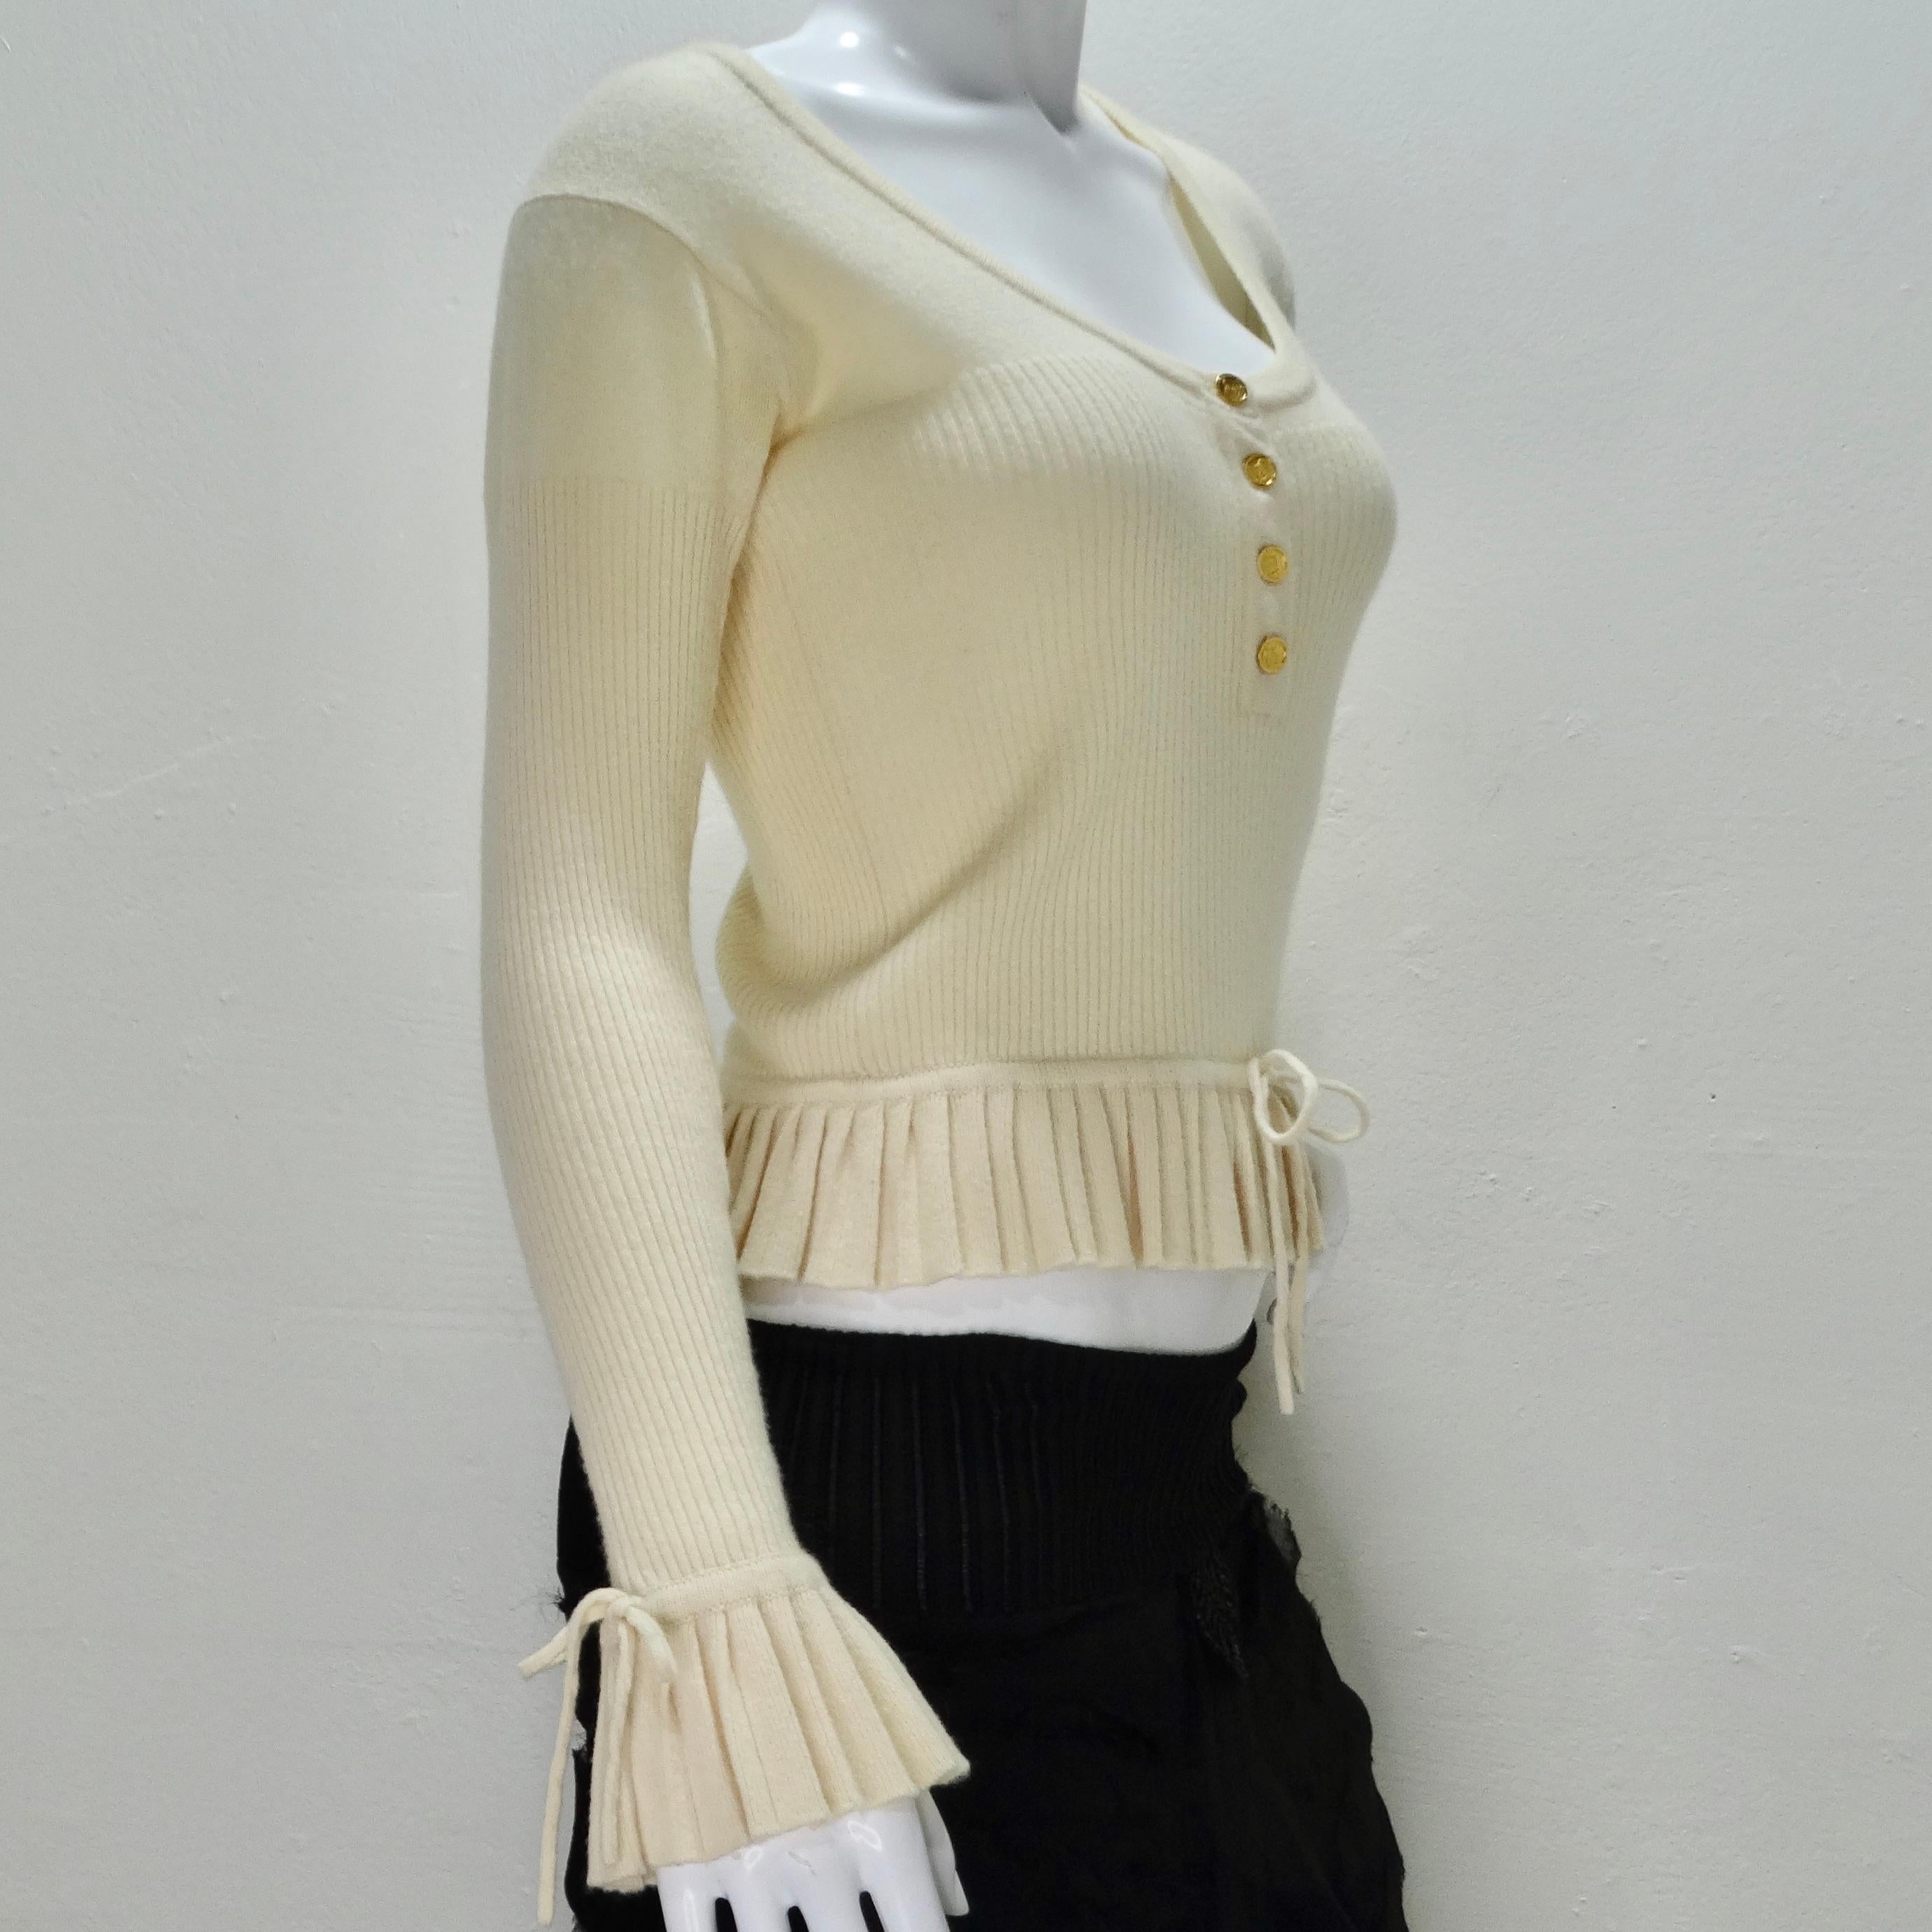 Chanel 1990s Ruffle Trim Tie Knit Cashmere Sweater  For Sale 3